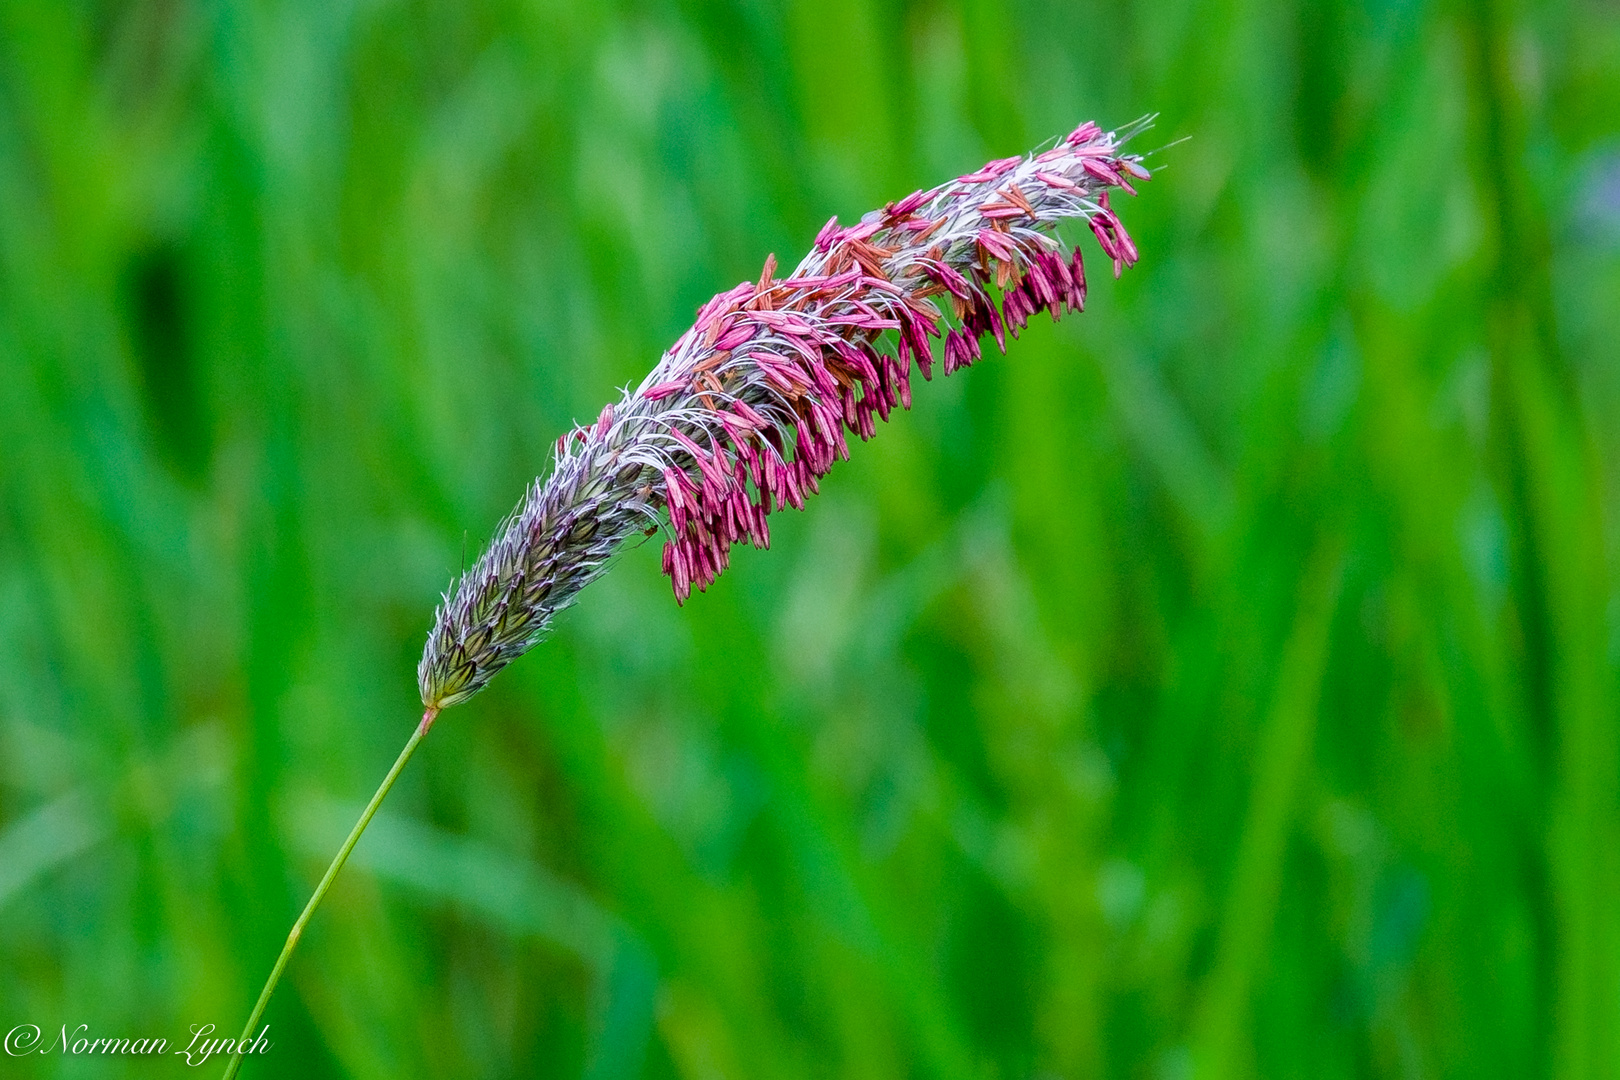 The Beauty of Grasses